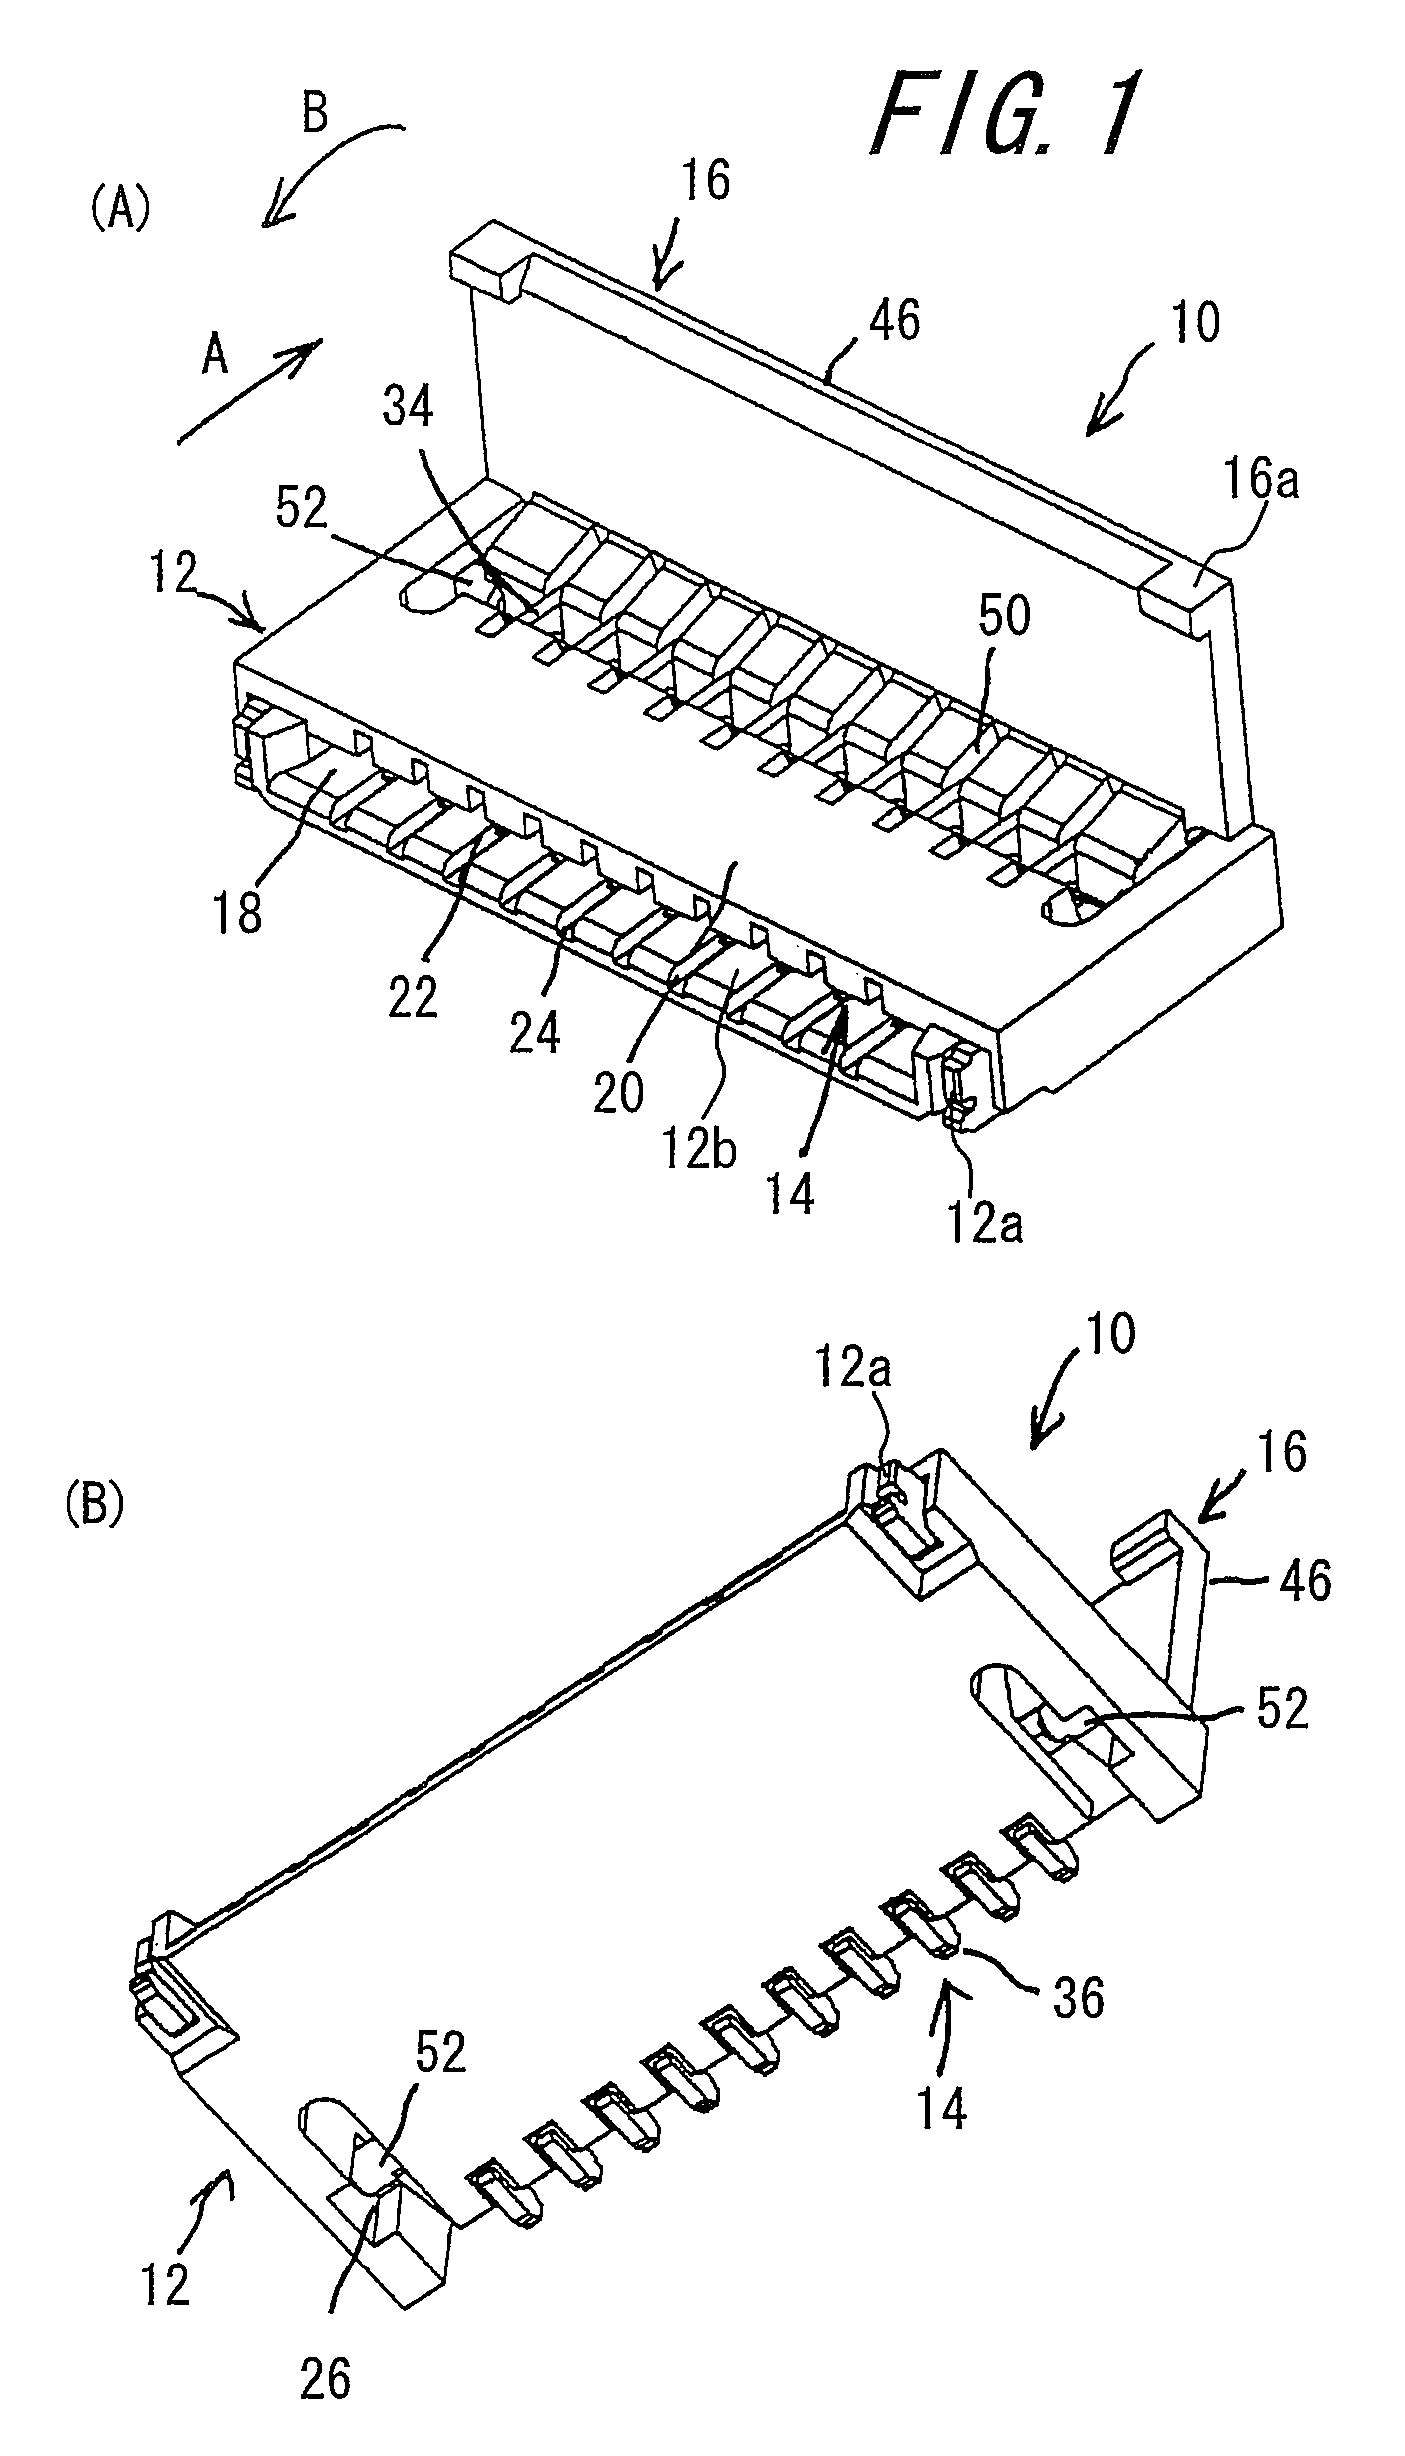 Space saving miniature connector for electric devices